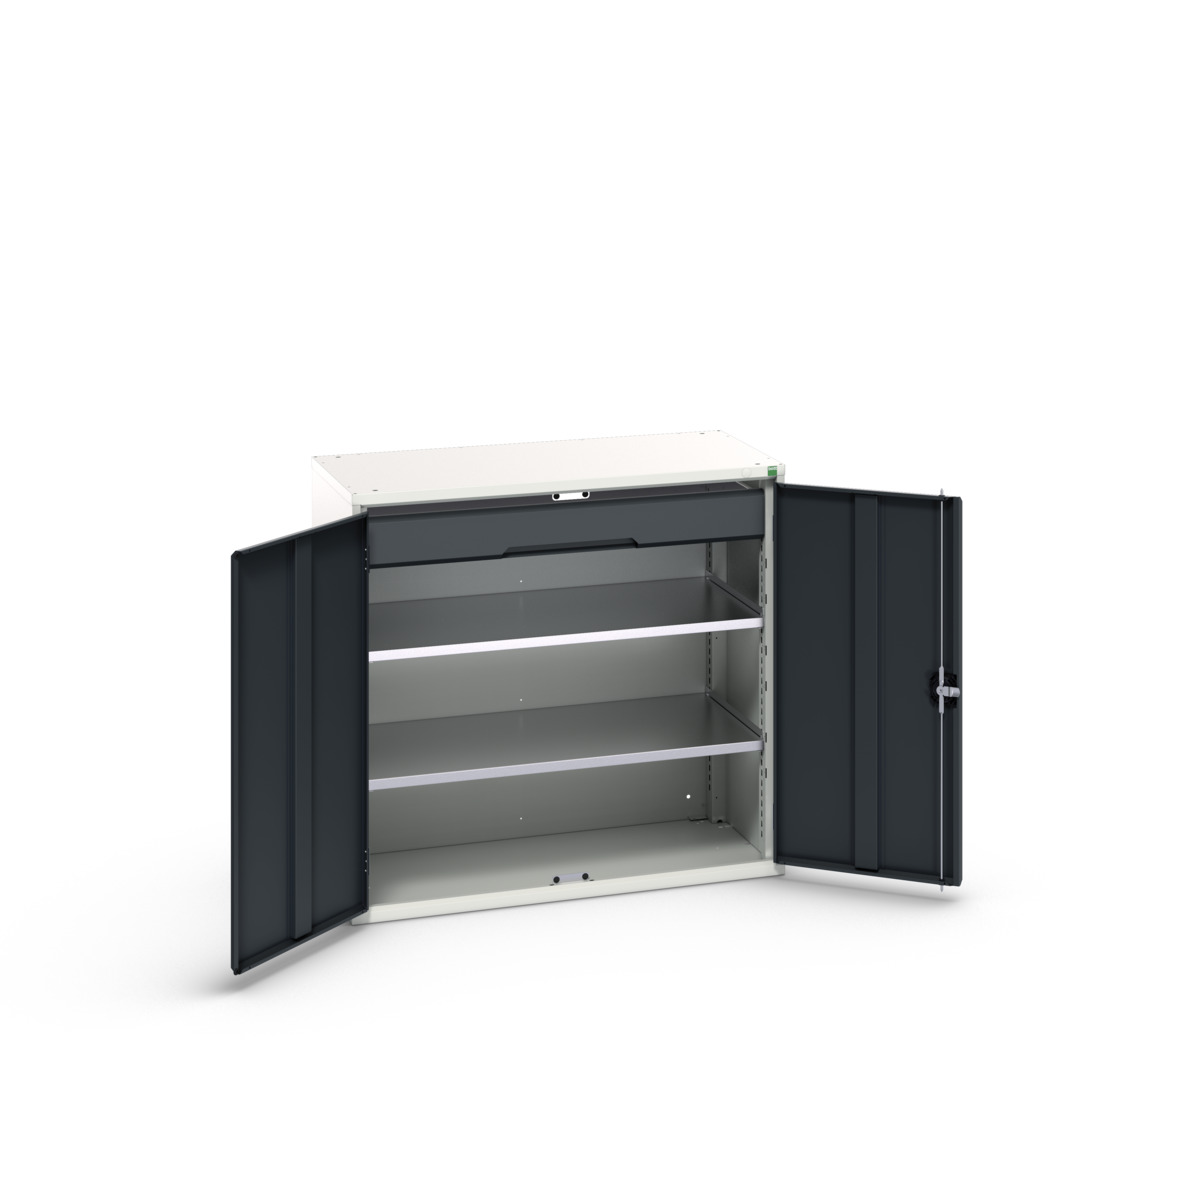 16926552. - verso kitted cupboard